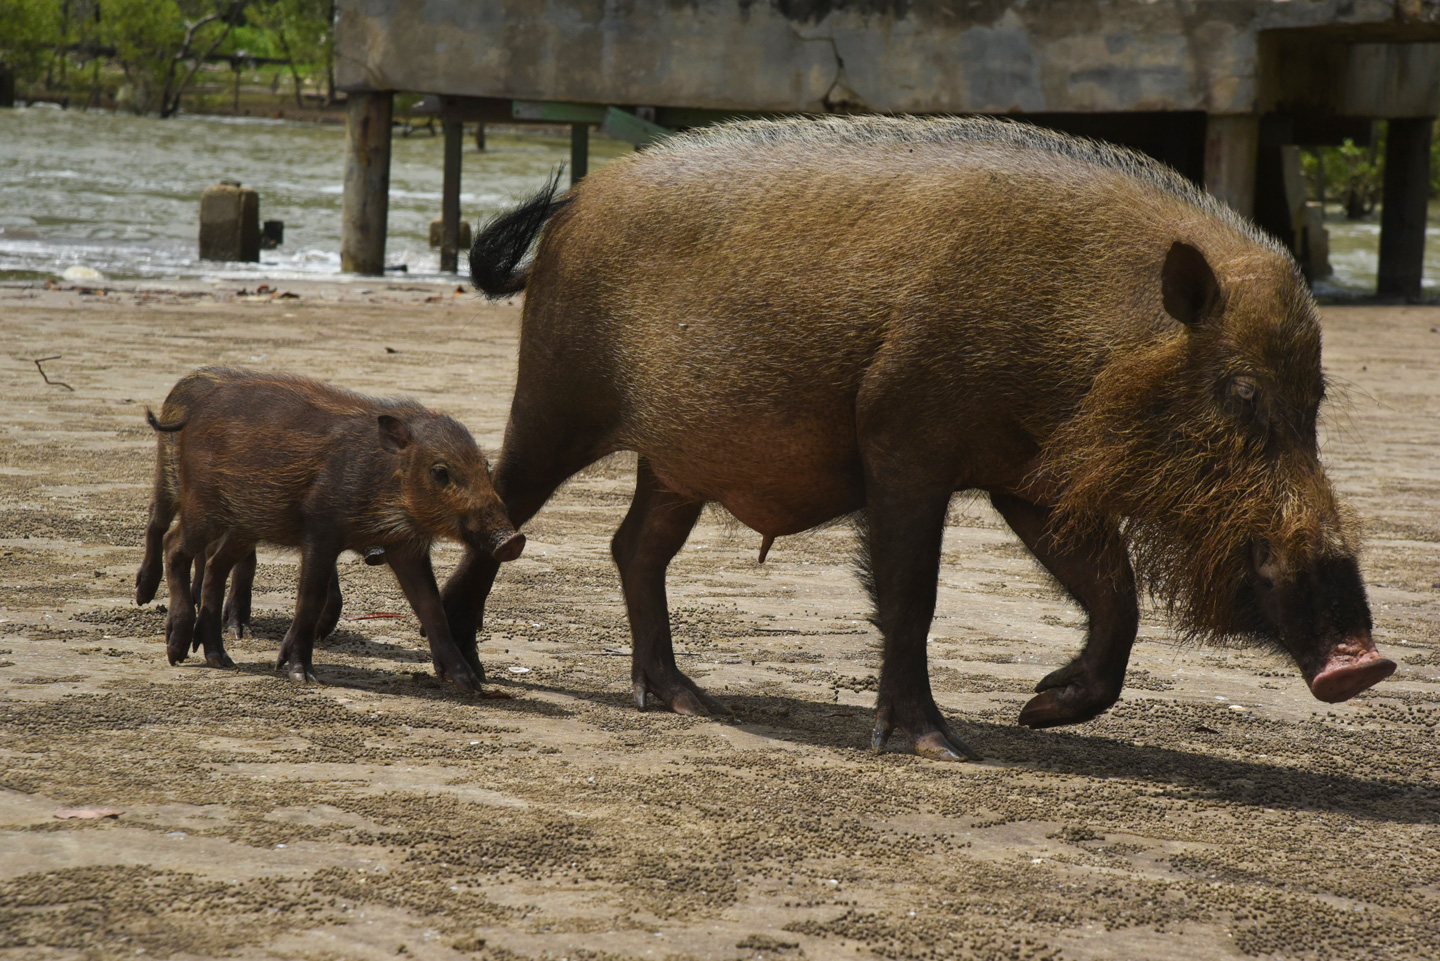 A photo of a bearded pig and piglet walking through a sandy area.